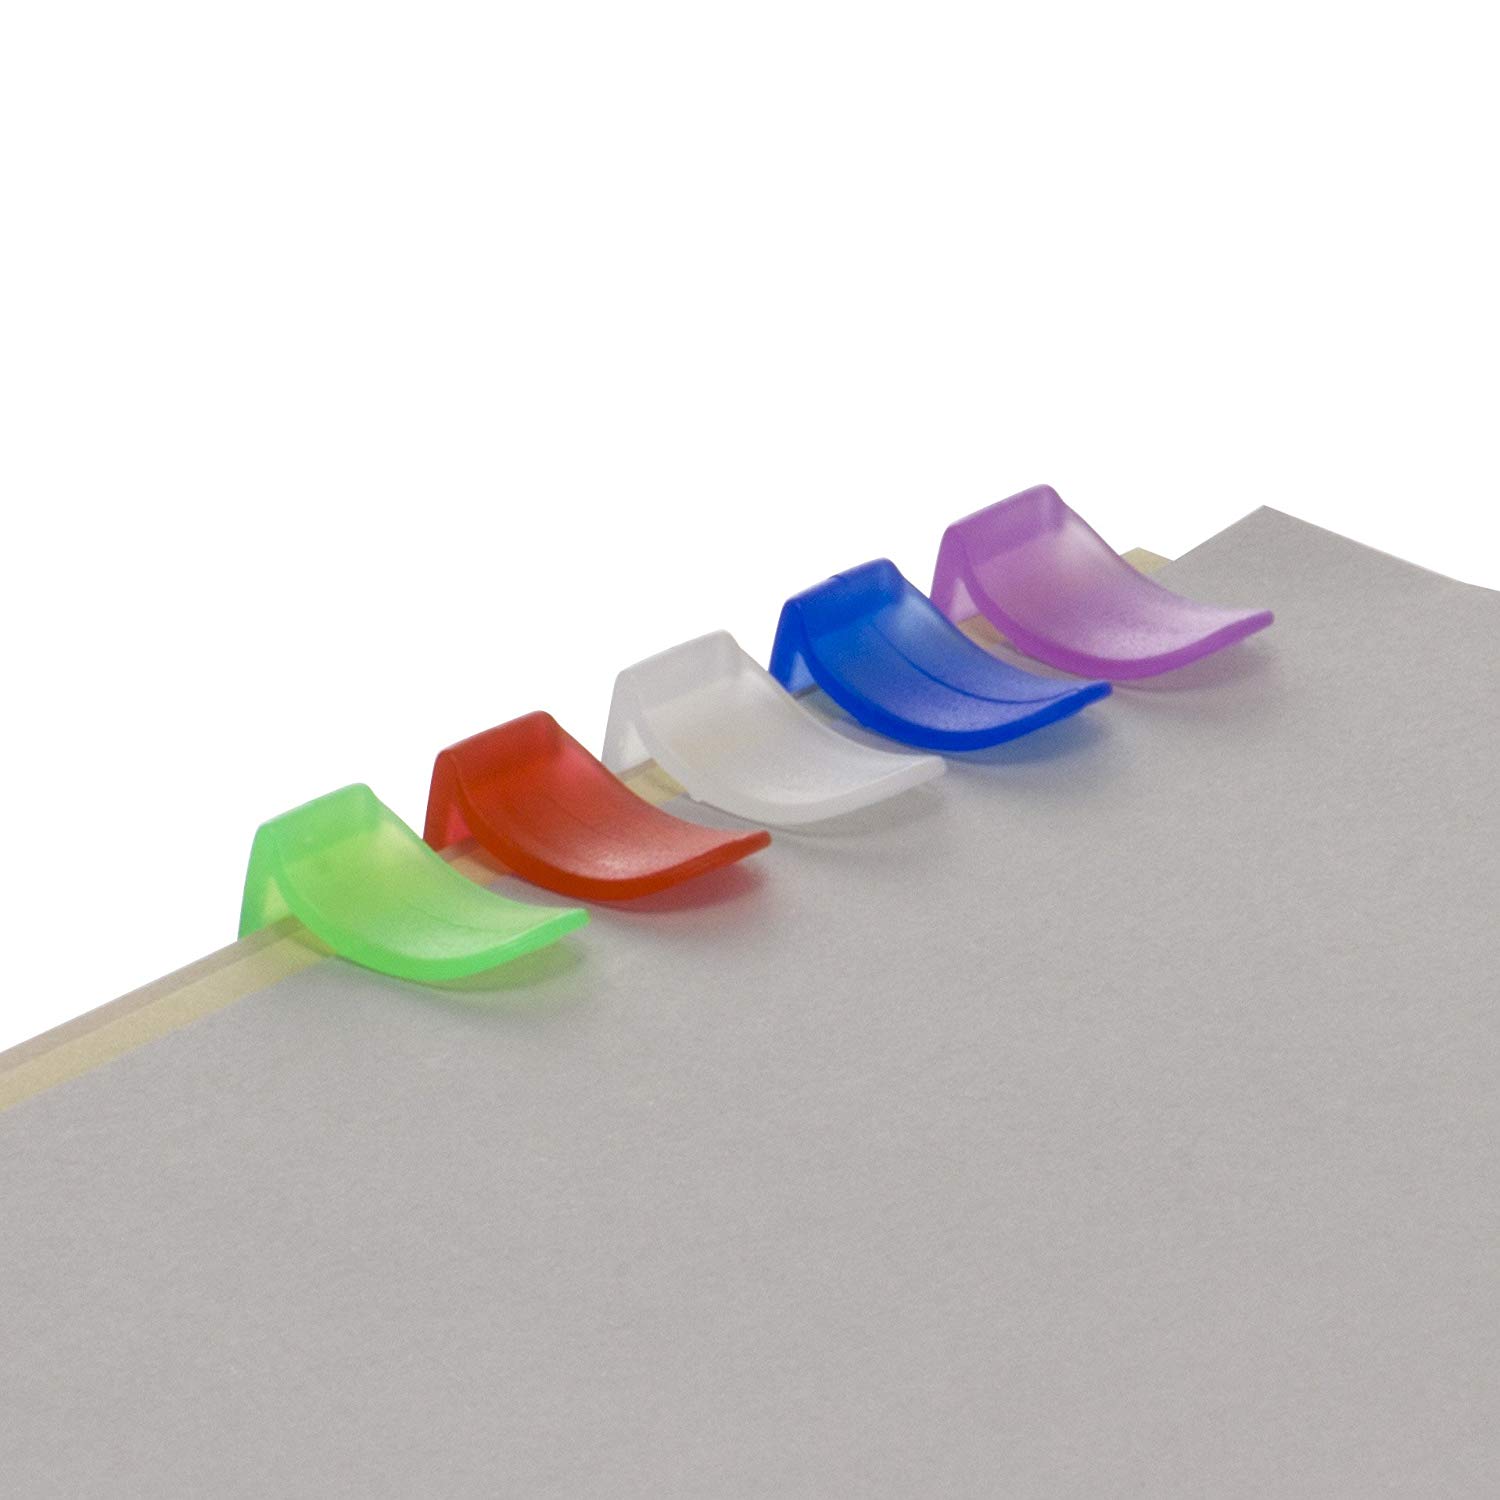 Amazon.com : Officemate OIC Slide On Plastic Clips, Assorted ...